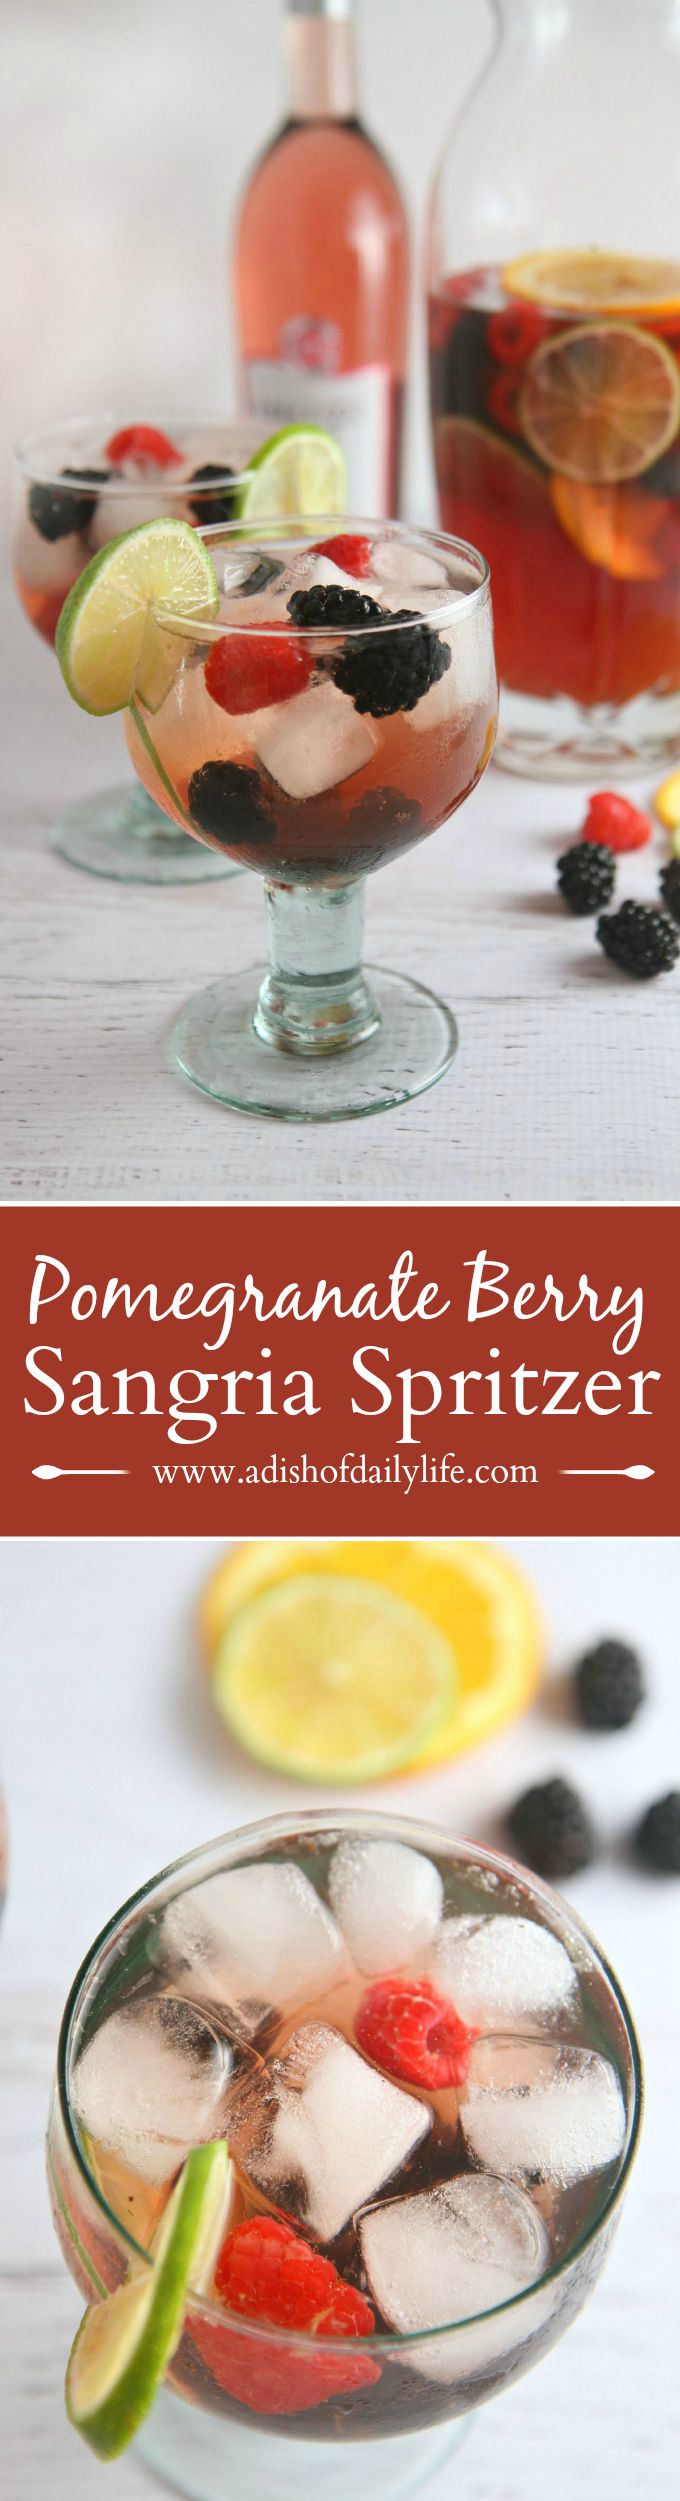 This Pomegranate Berry Sangria Spritzer recipe is a delicious refreshing and "lightened up" version of a traditional sangria...perfect for casual entertaining!